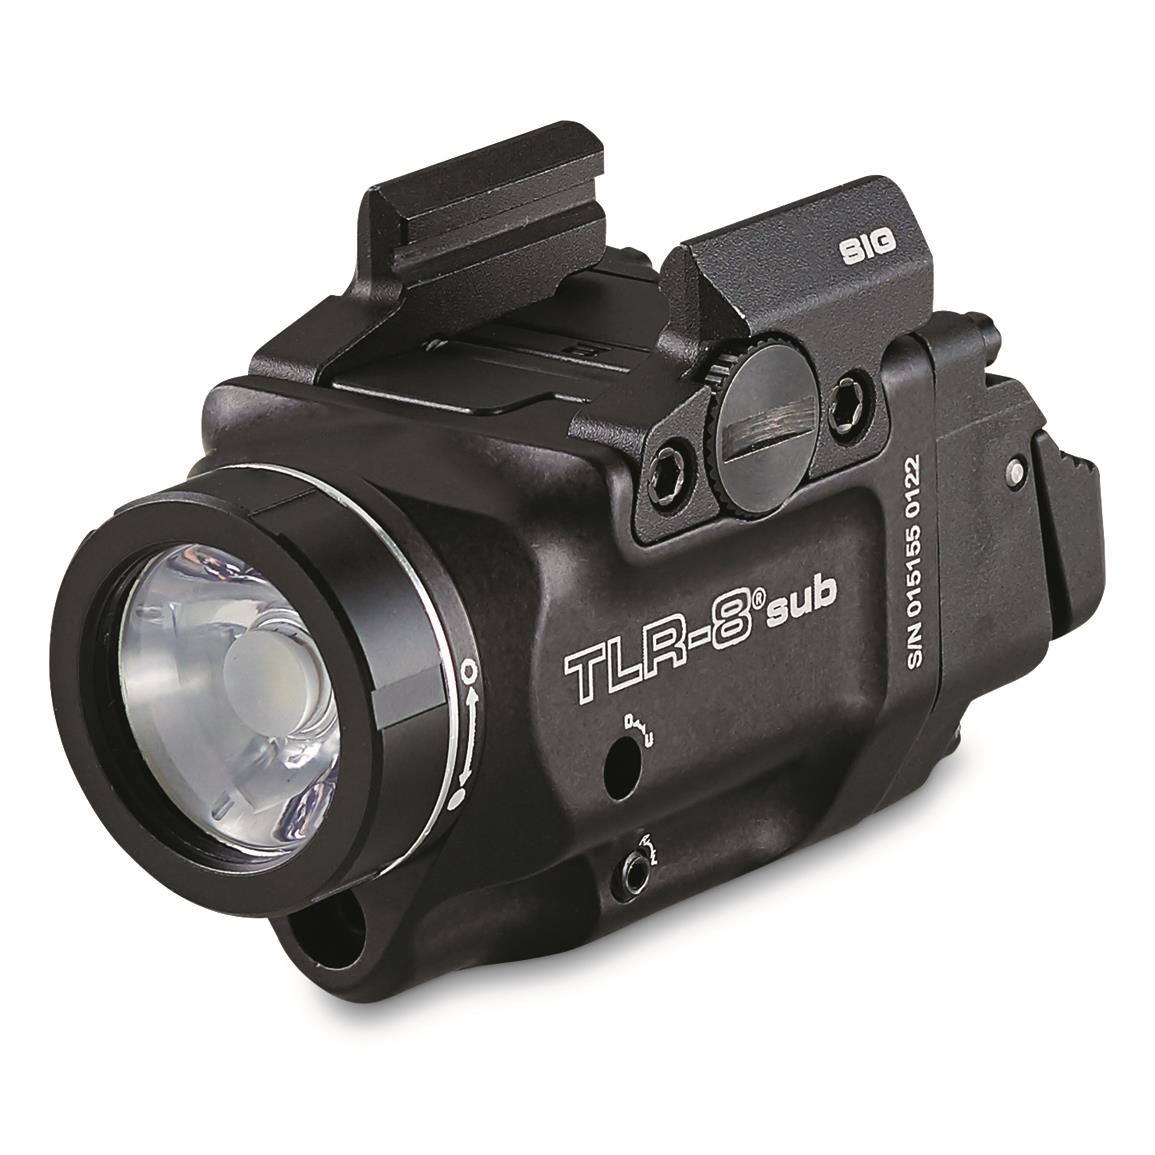 Streamlight TLR-8 Sub Tactical Pistol Light with Red Laser, for SIG SAUER P365/XL